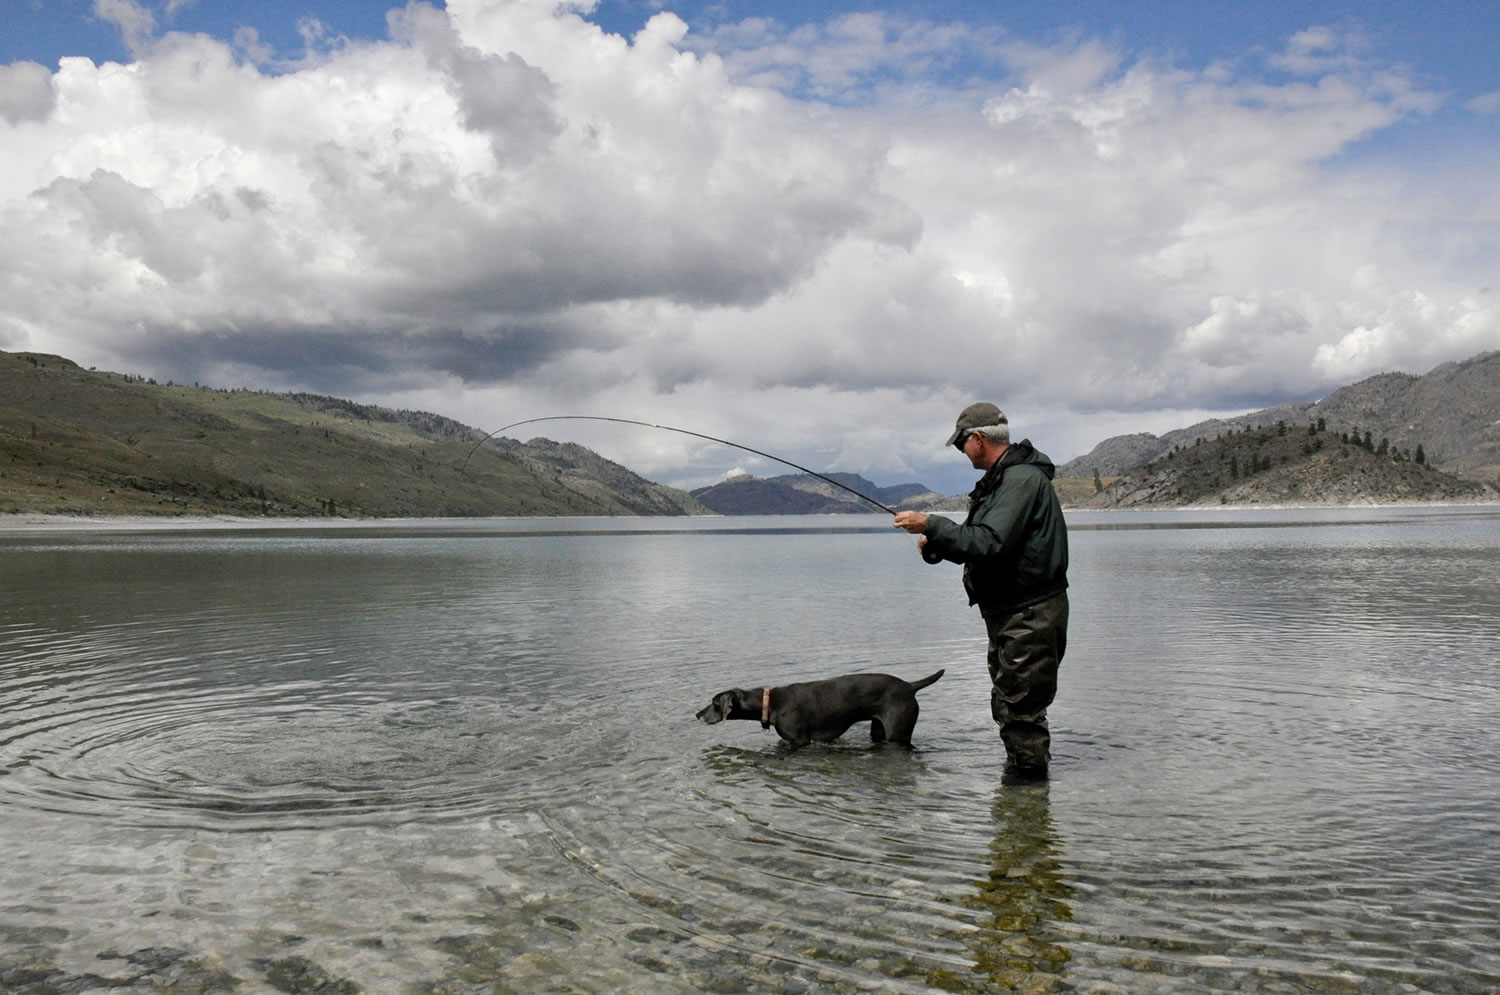 Fly fisherman Walt Balek's dog, Cargo, watches him land a Lahontan cutthroat trout May 5 at Omak Lake. On the million-acre Colville Indian Reservation reservation, two dozen of about 35 fishable lakes are open to nontribal anglers. A few of them are outstanding.